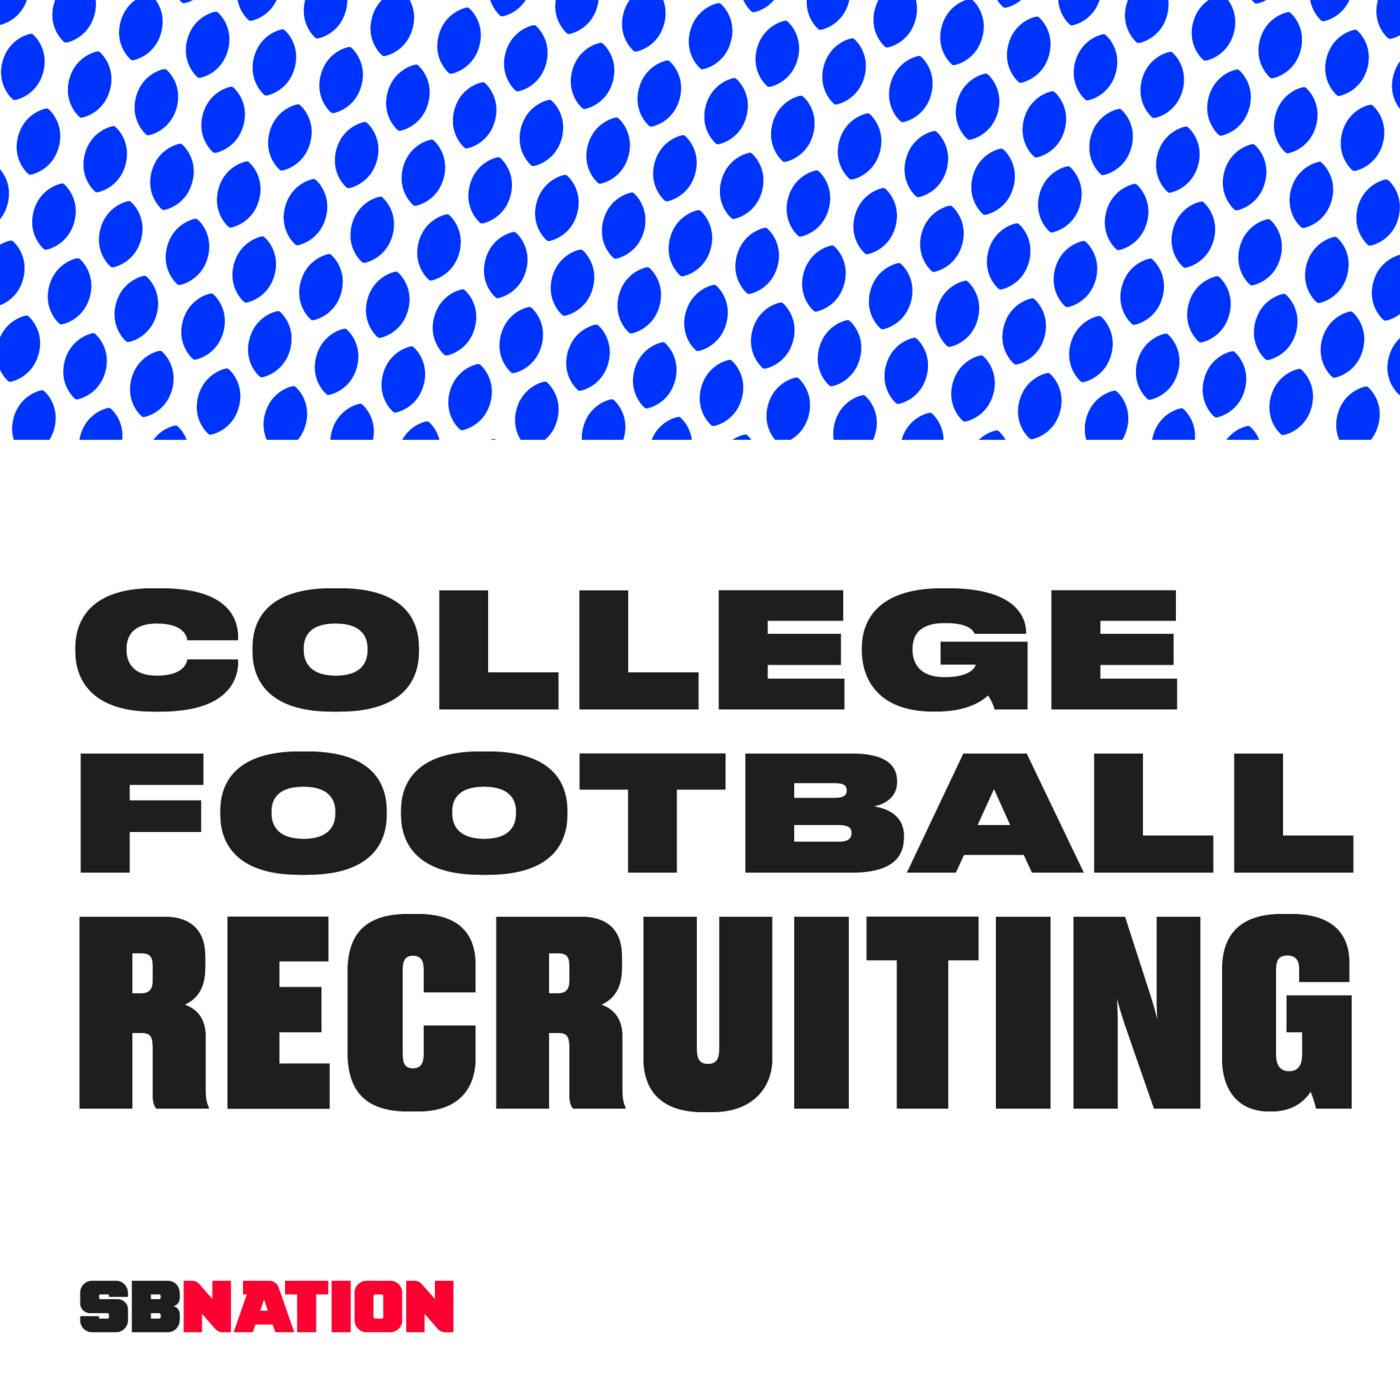 How many schools have the potential to recruit like national champs?